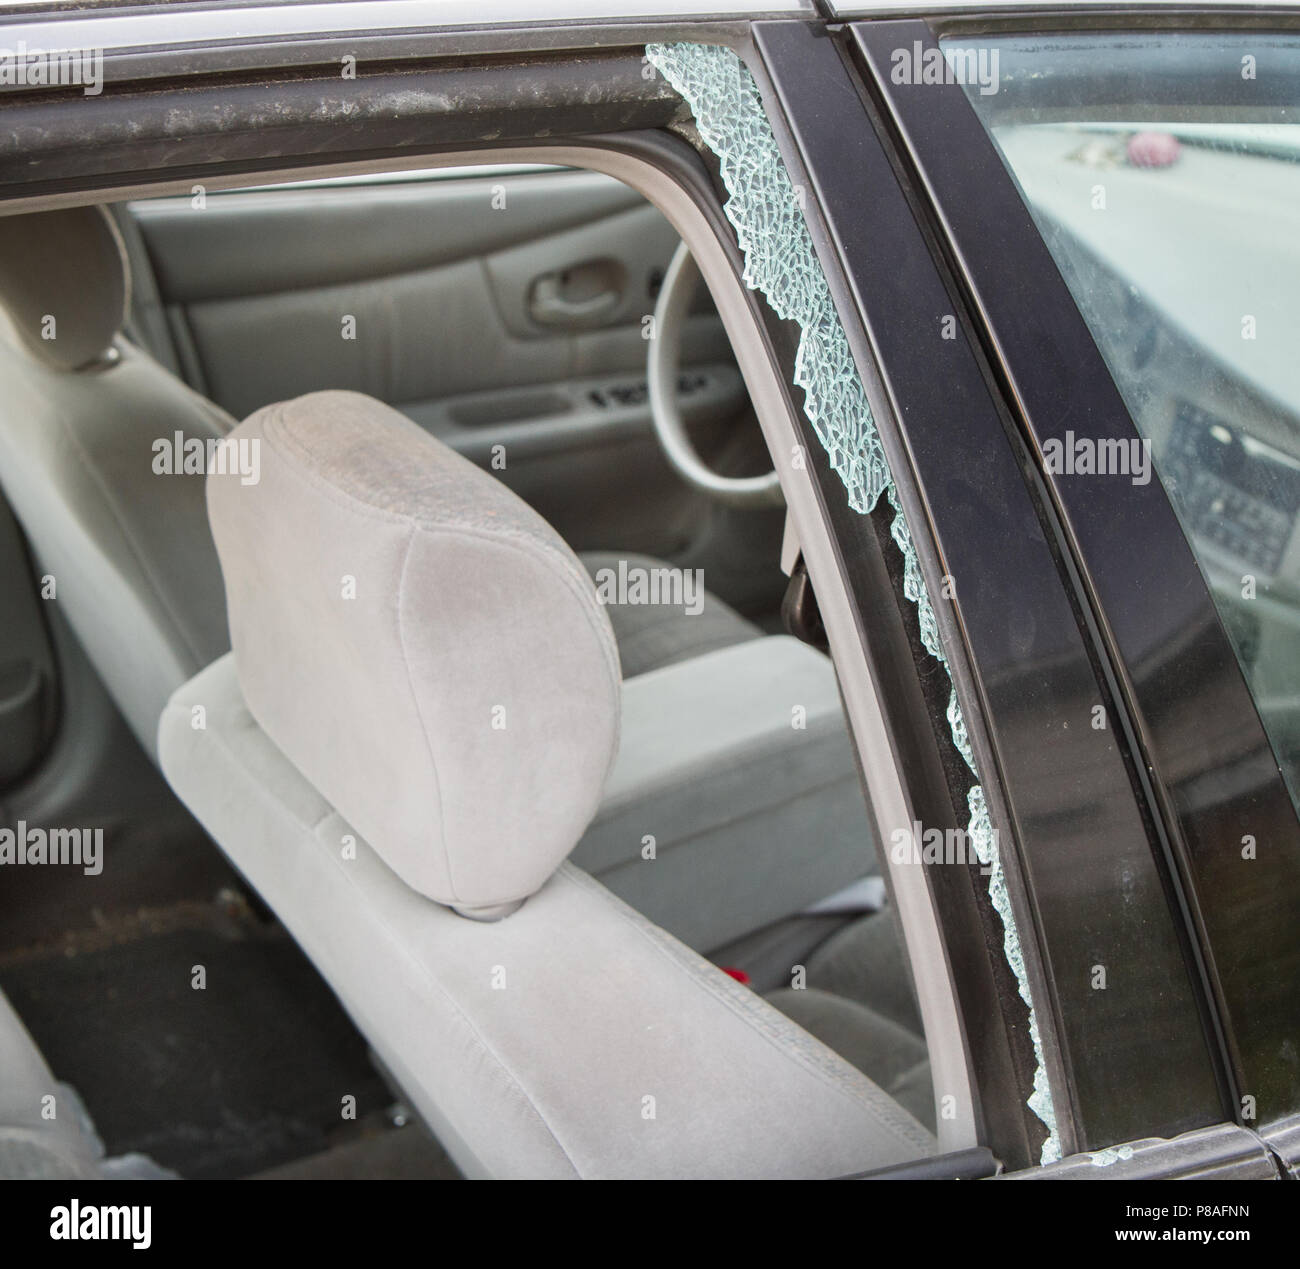 Car wreck causing a broken window. Can show auto safety, insurance industry, or even theft and vandalism Stock Photo